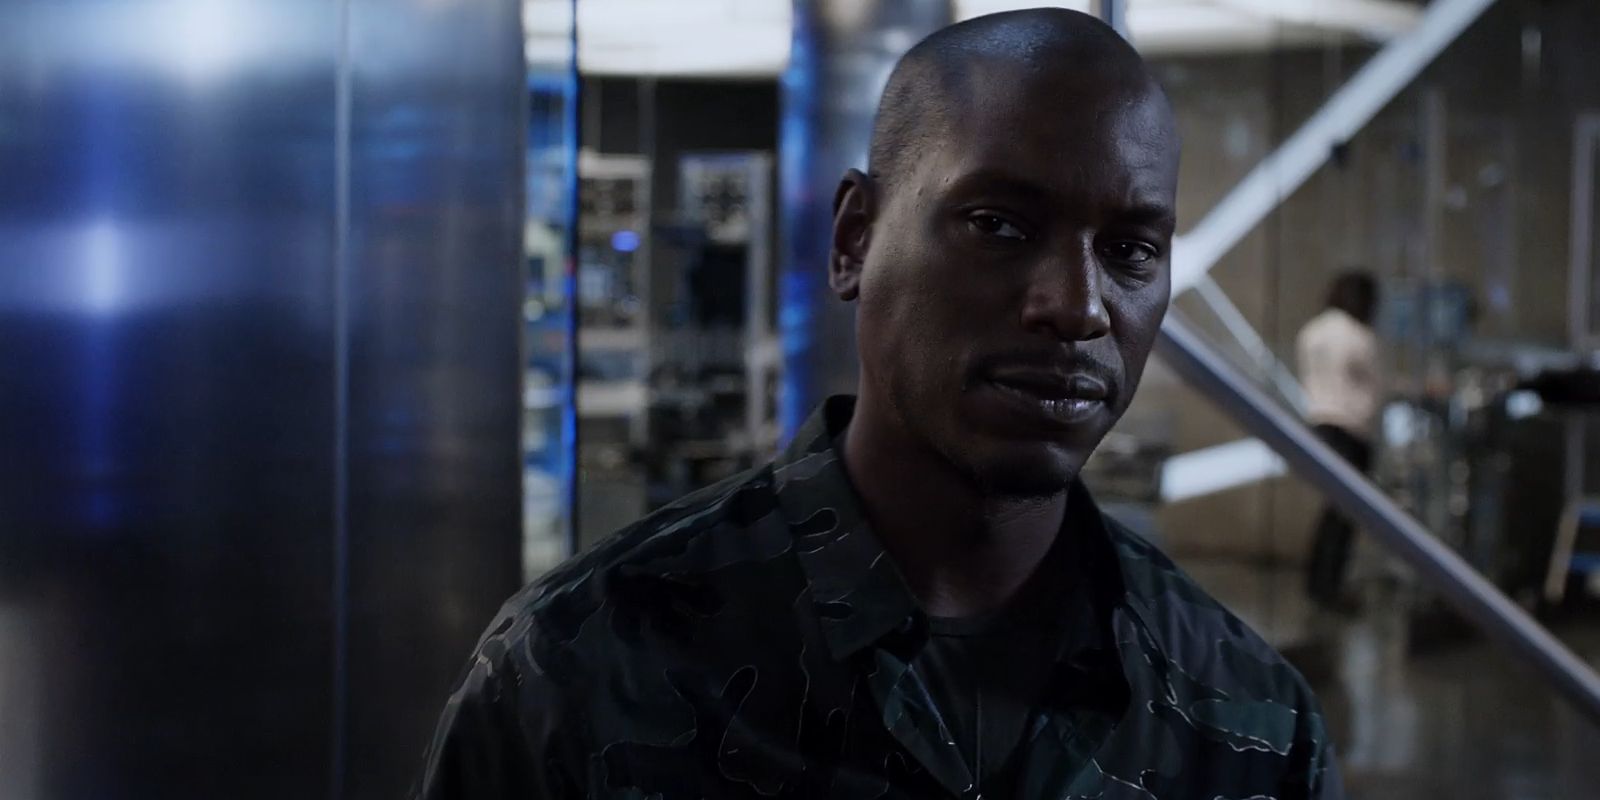 Tyrese Gibson as Roman Pierce in Fate of the Furious